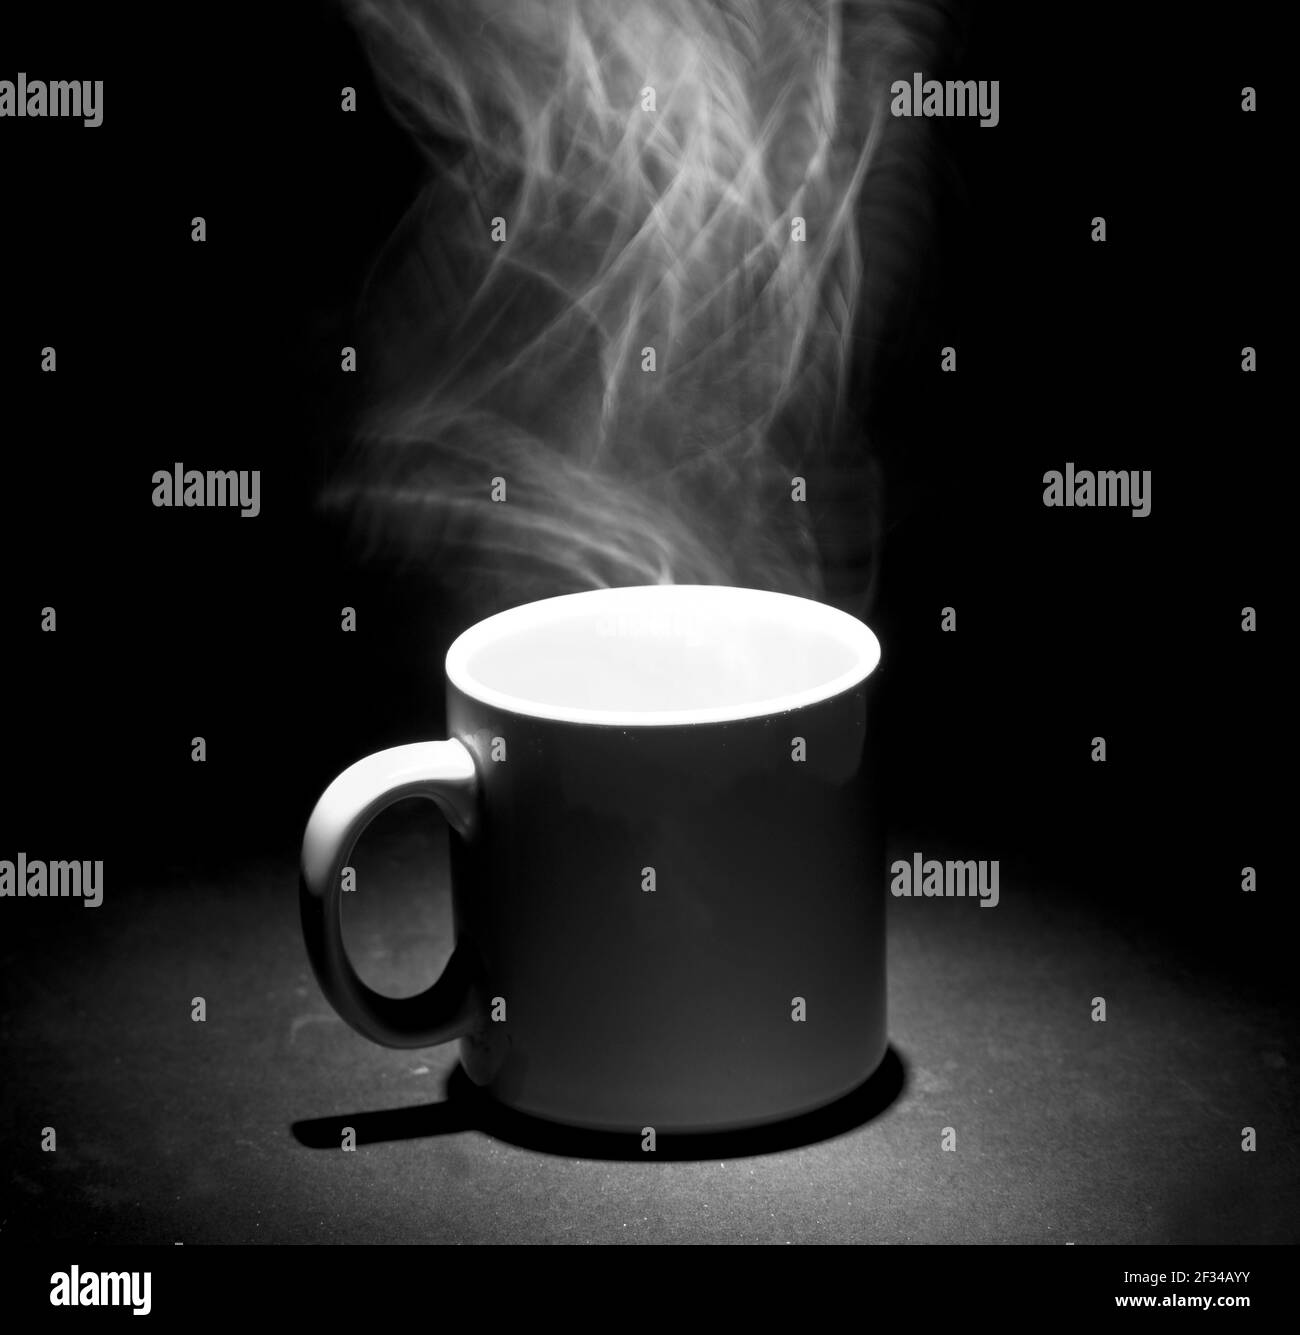 A grayscale photo of steam coming out of a mug on a black background Stock Photo